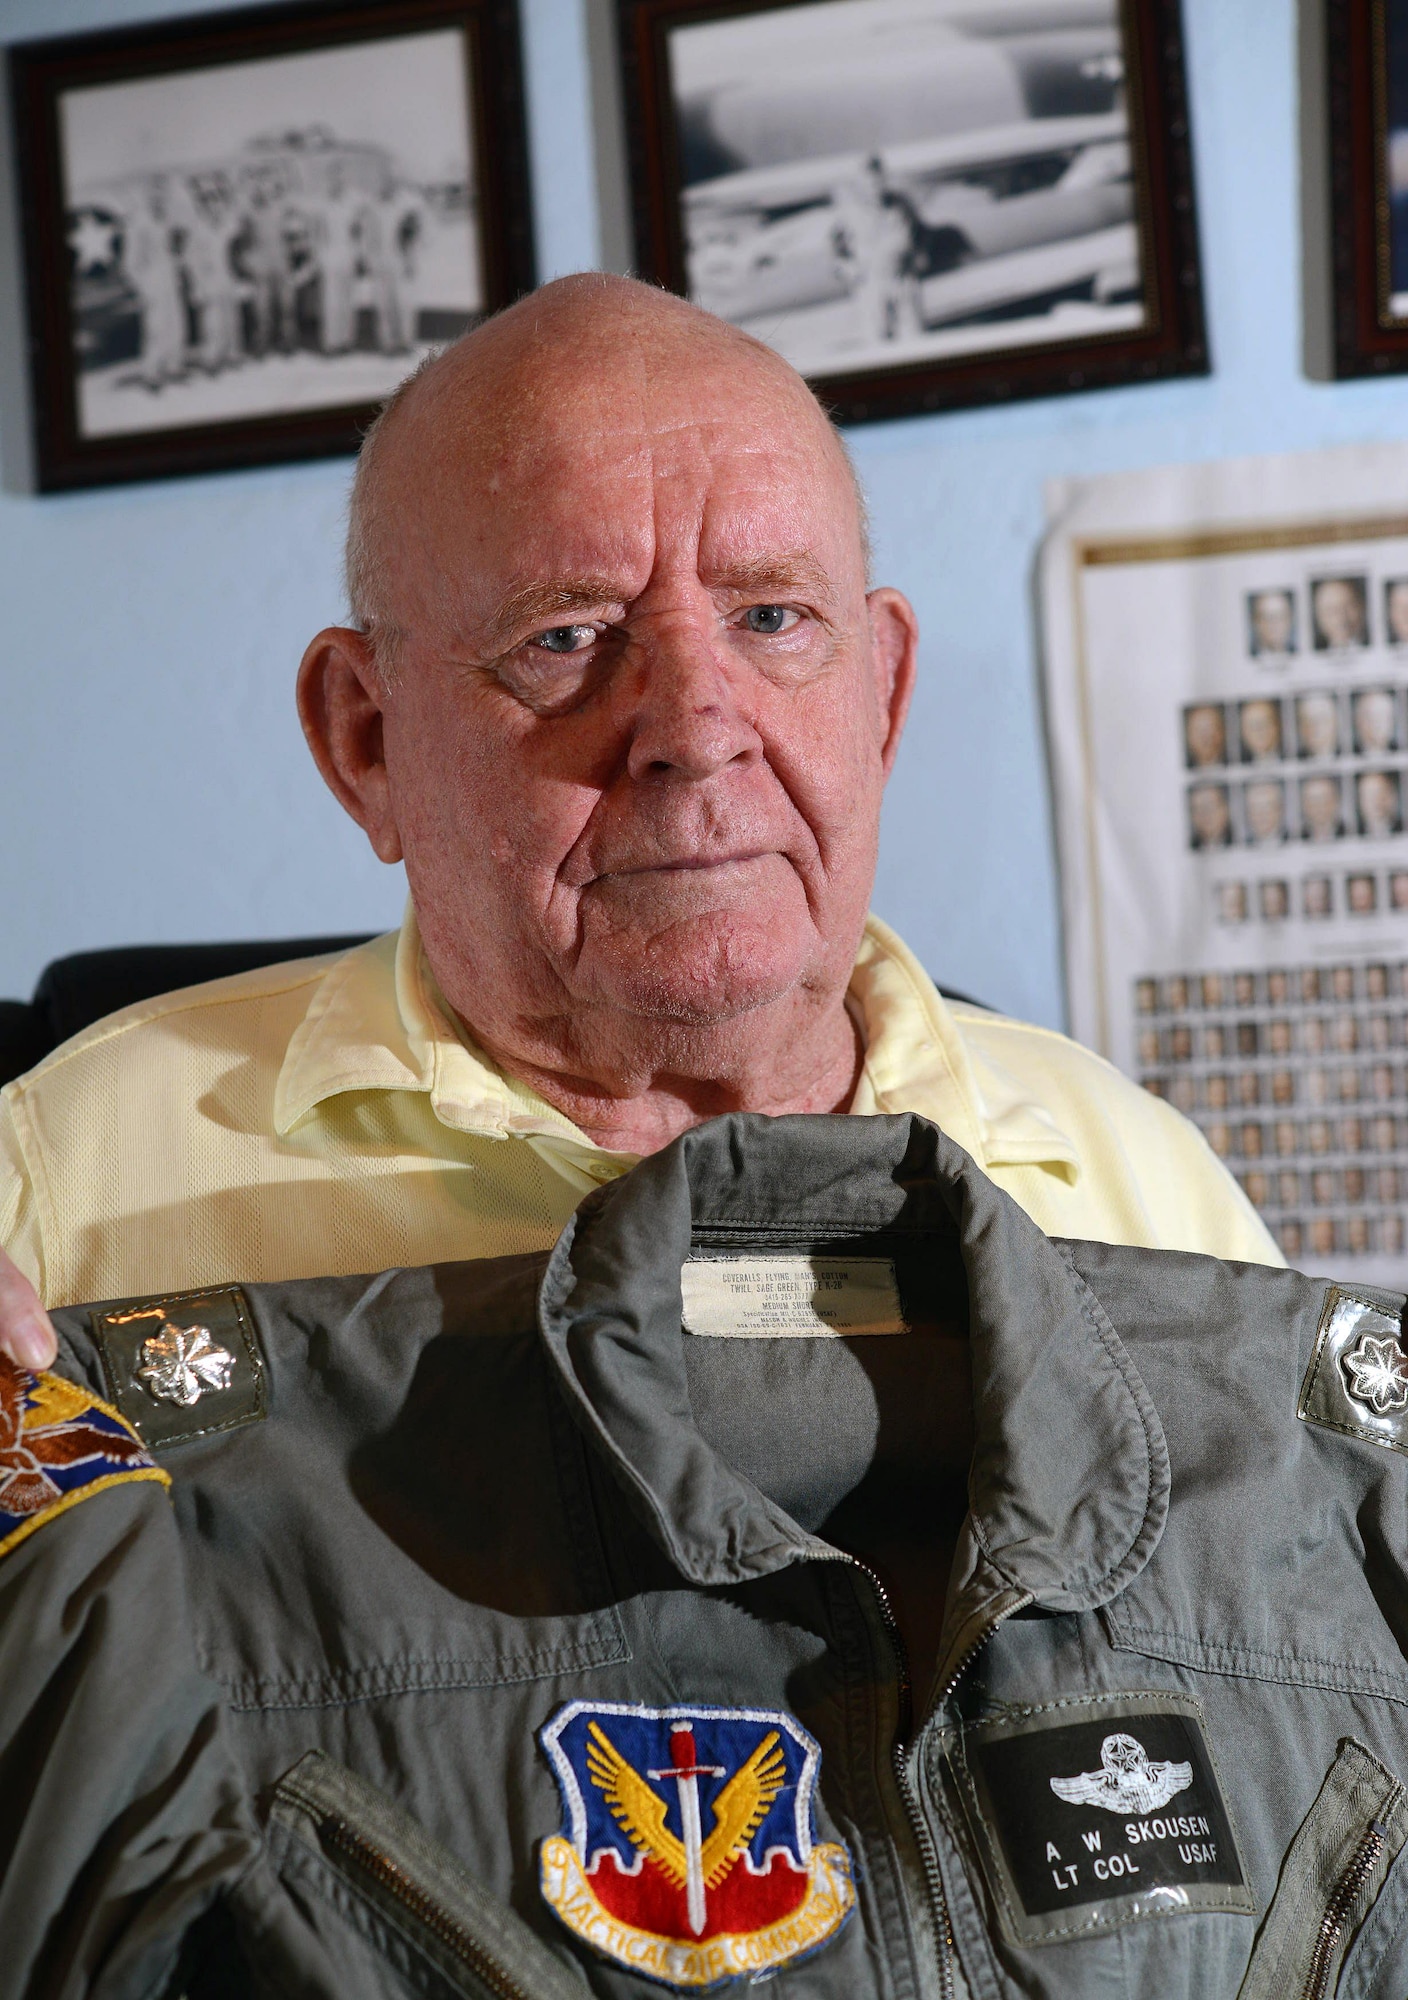 Retired Lt. Col. Alma Skousen shows off his flight suit Oct. 30, 2015, in his Mesa, Ariz., home. Skousen flew combat missions in the Korean and Vietnam wars and was awarded the Distinguished Flying Cross for acts of heroism and extraordinary achievement while participating in an aerial flight. Skousen ended his flying career with more than 6,000 flying hours. (U.S. Air Force photo/Tech. Sgt. Timothy Boyer) 